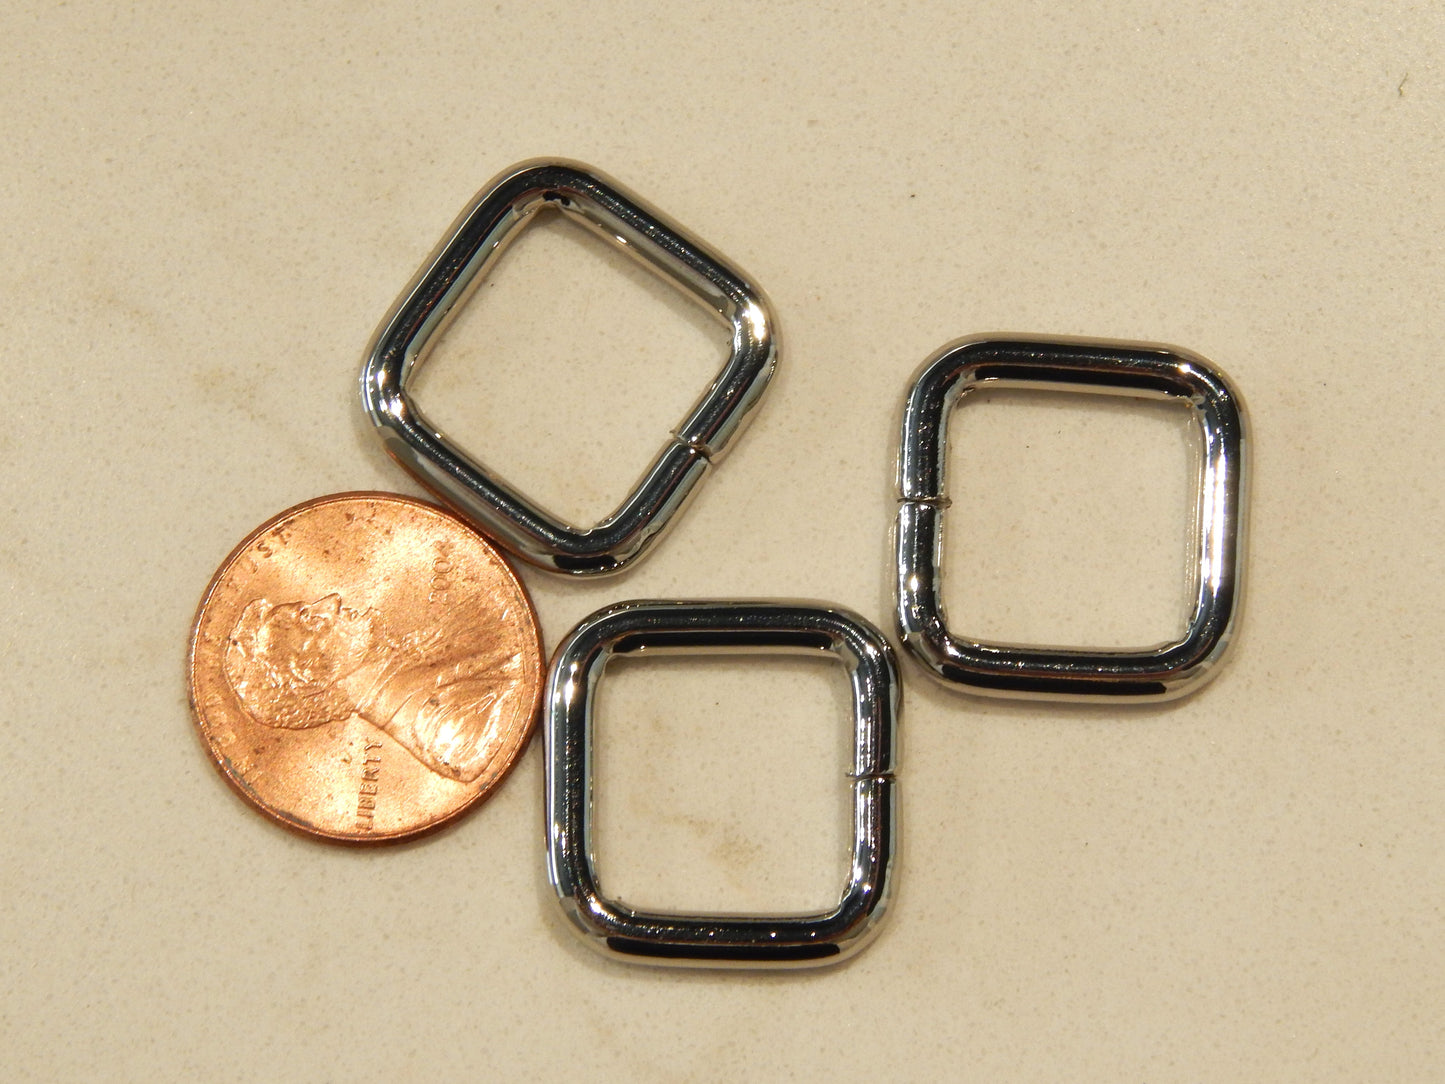 Rectangle Rings - 1/2" - Gold, Silver, & Iridescent